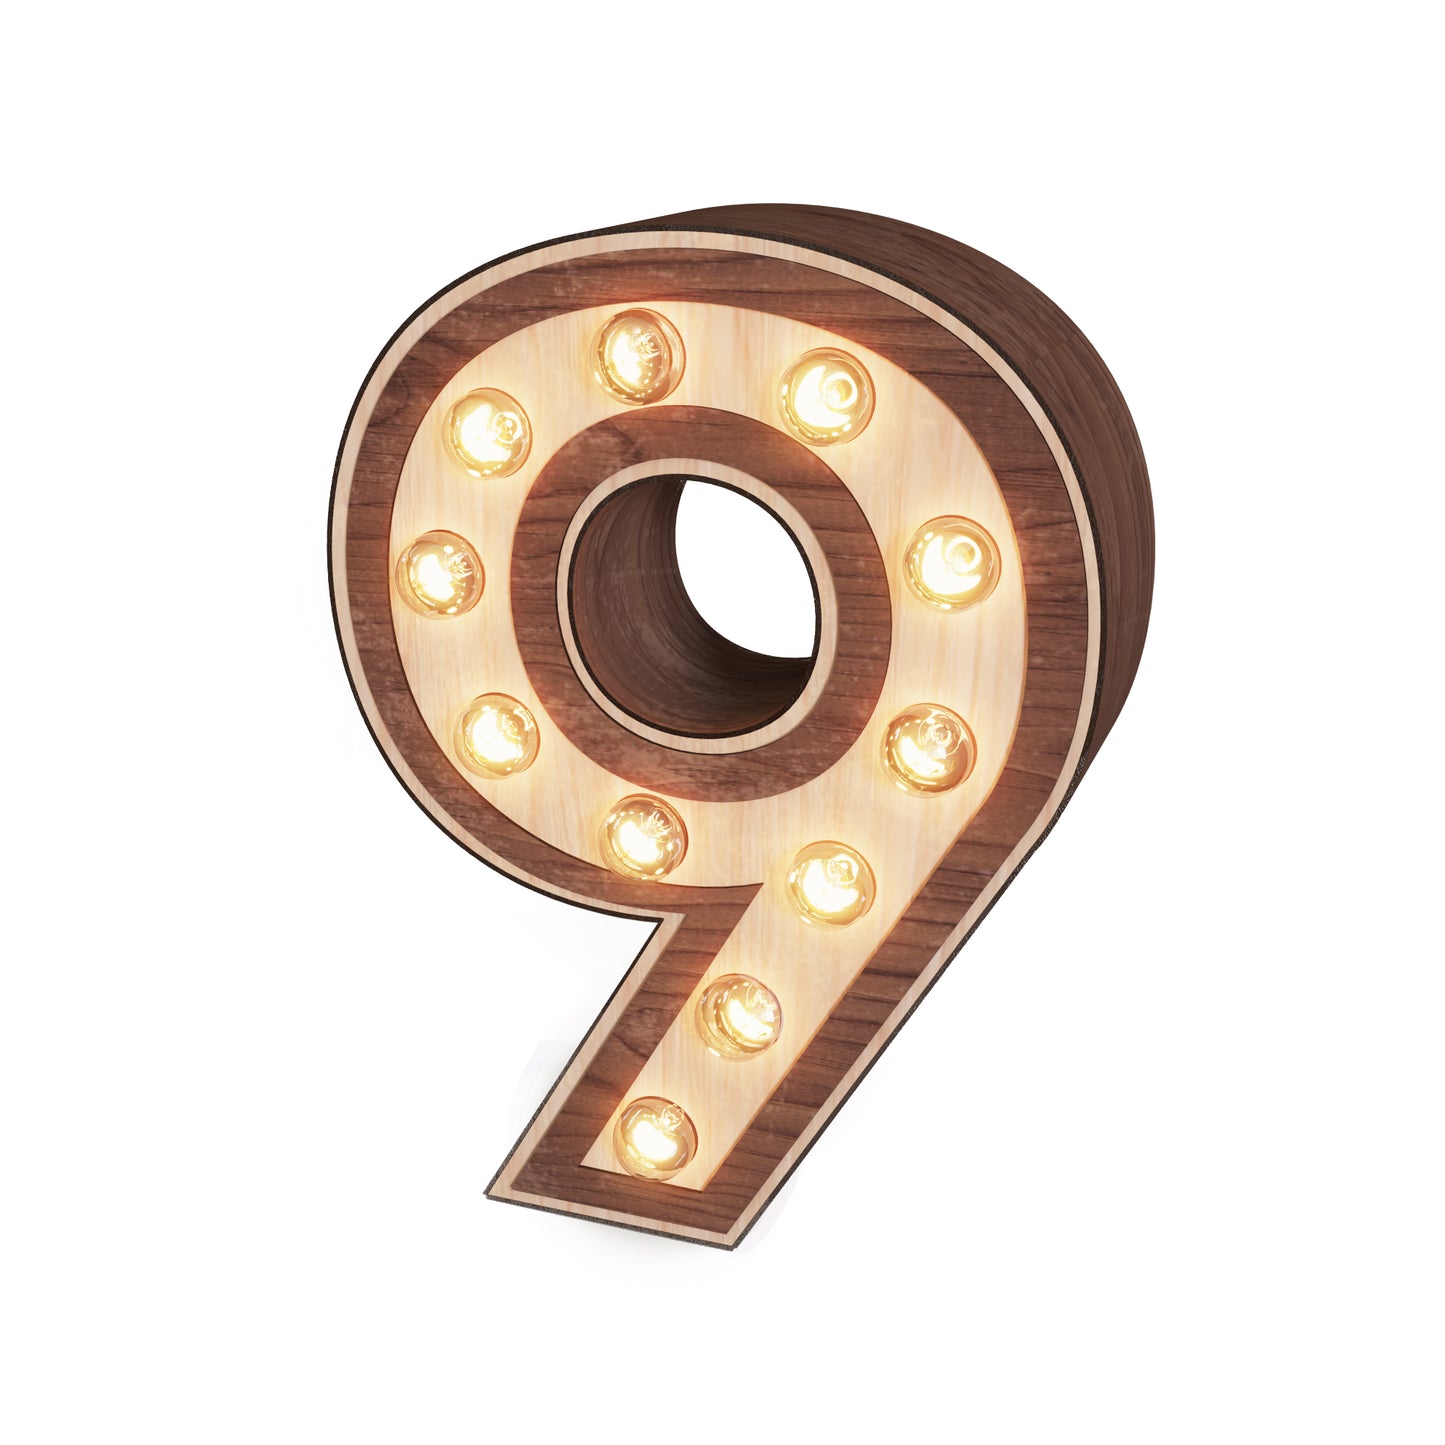 Light-up Marquee Number Display "9"